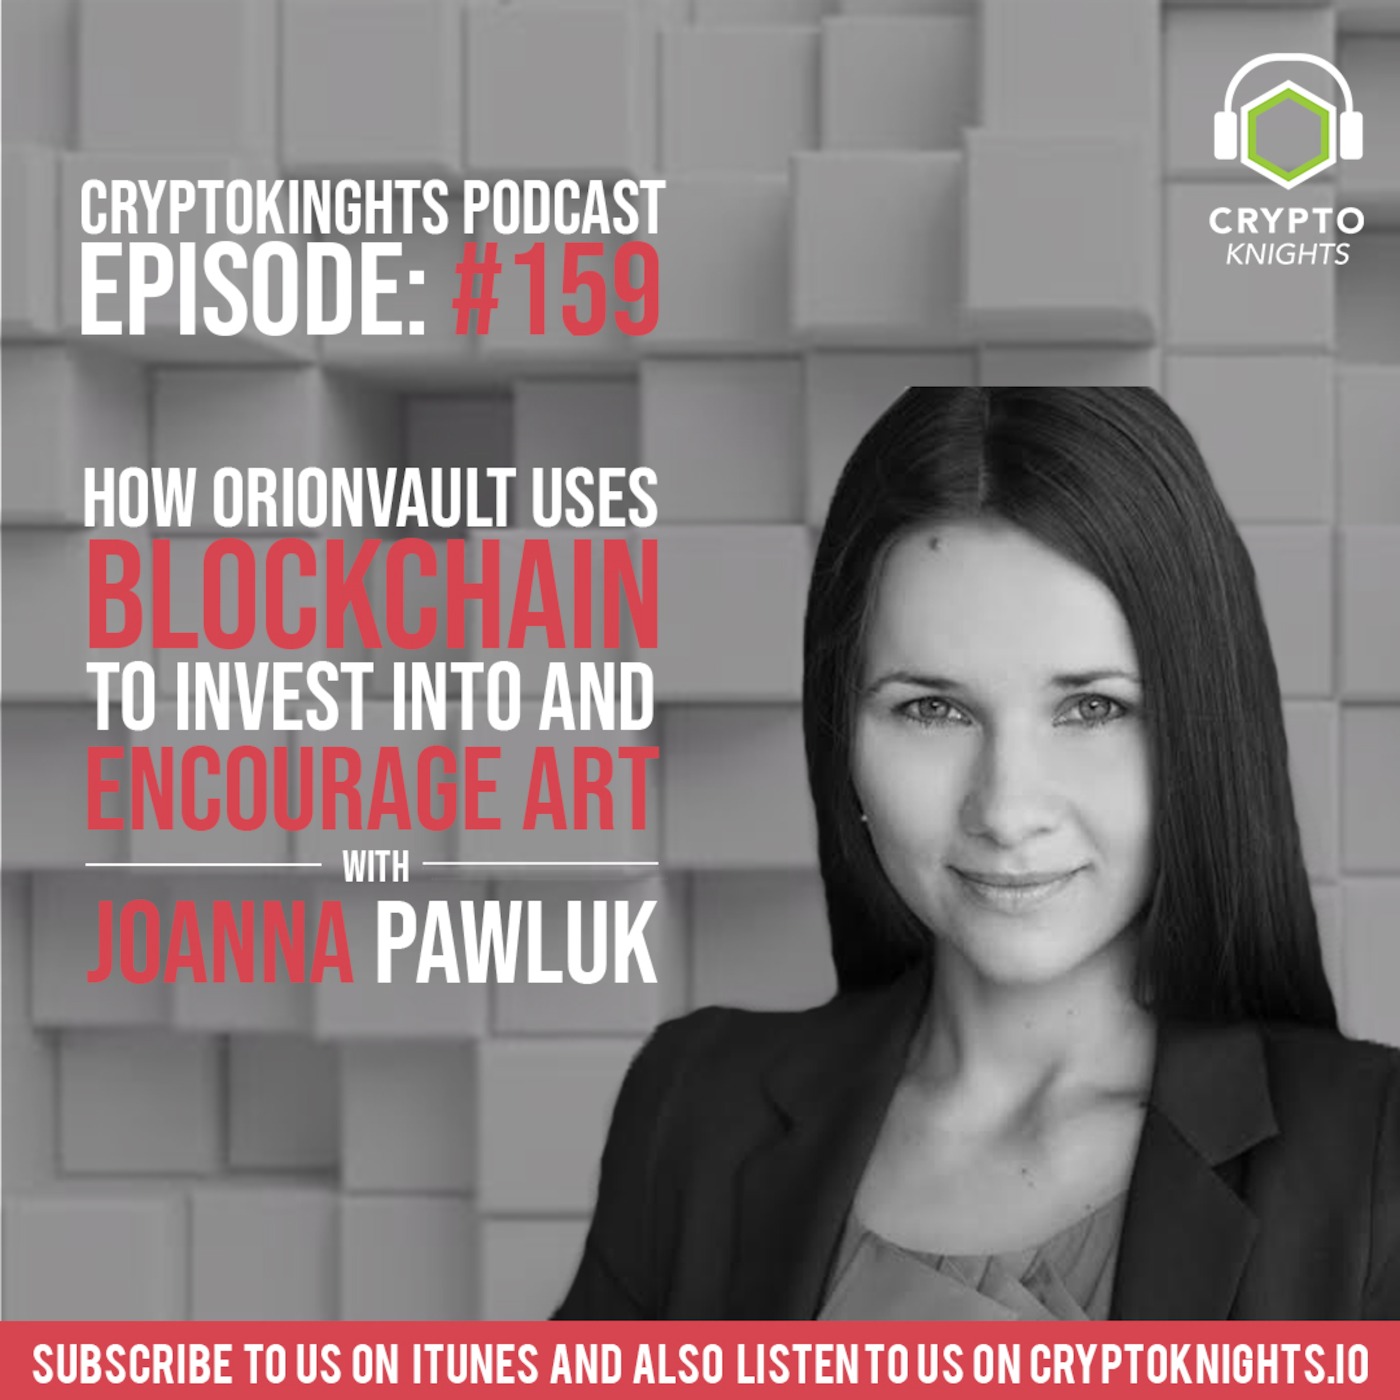 Episode 159 - How OrionVault uses blockchain to invest into and encourage art